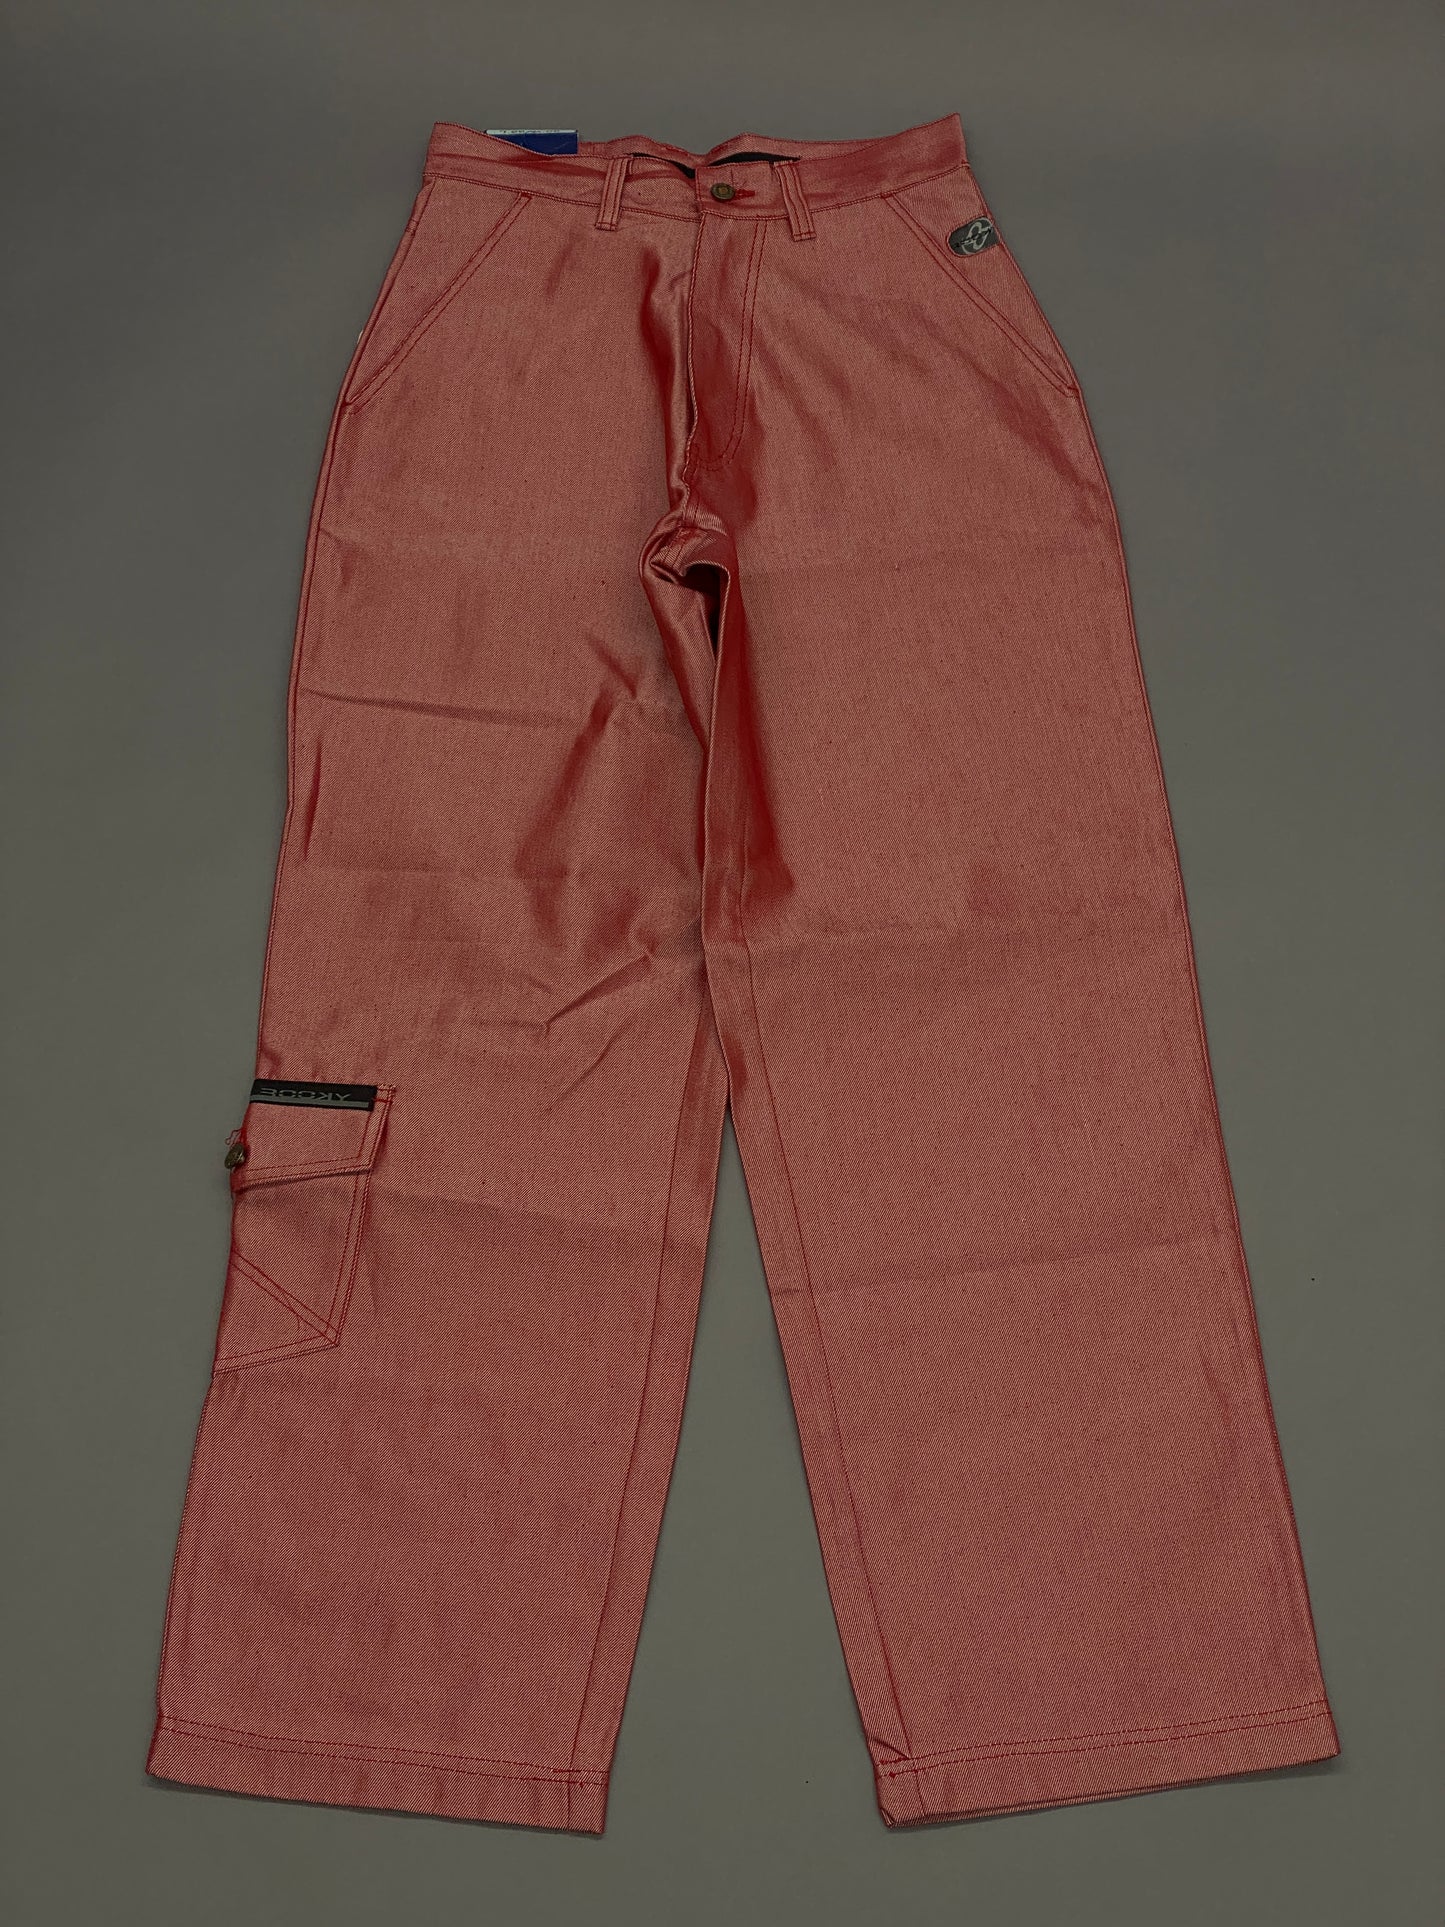 Rocky Vintage Baggy Flash Red Jeans - 30 x 33 (Deadstock)